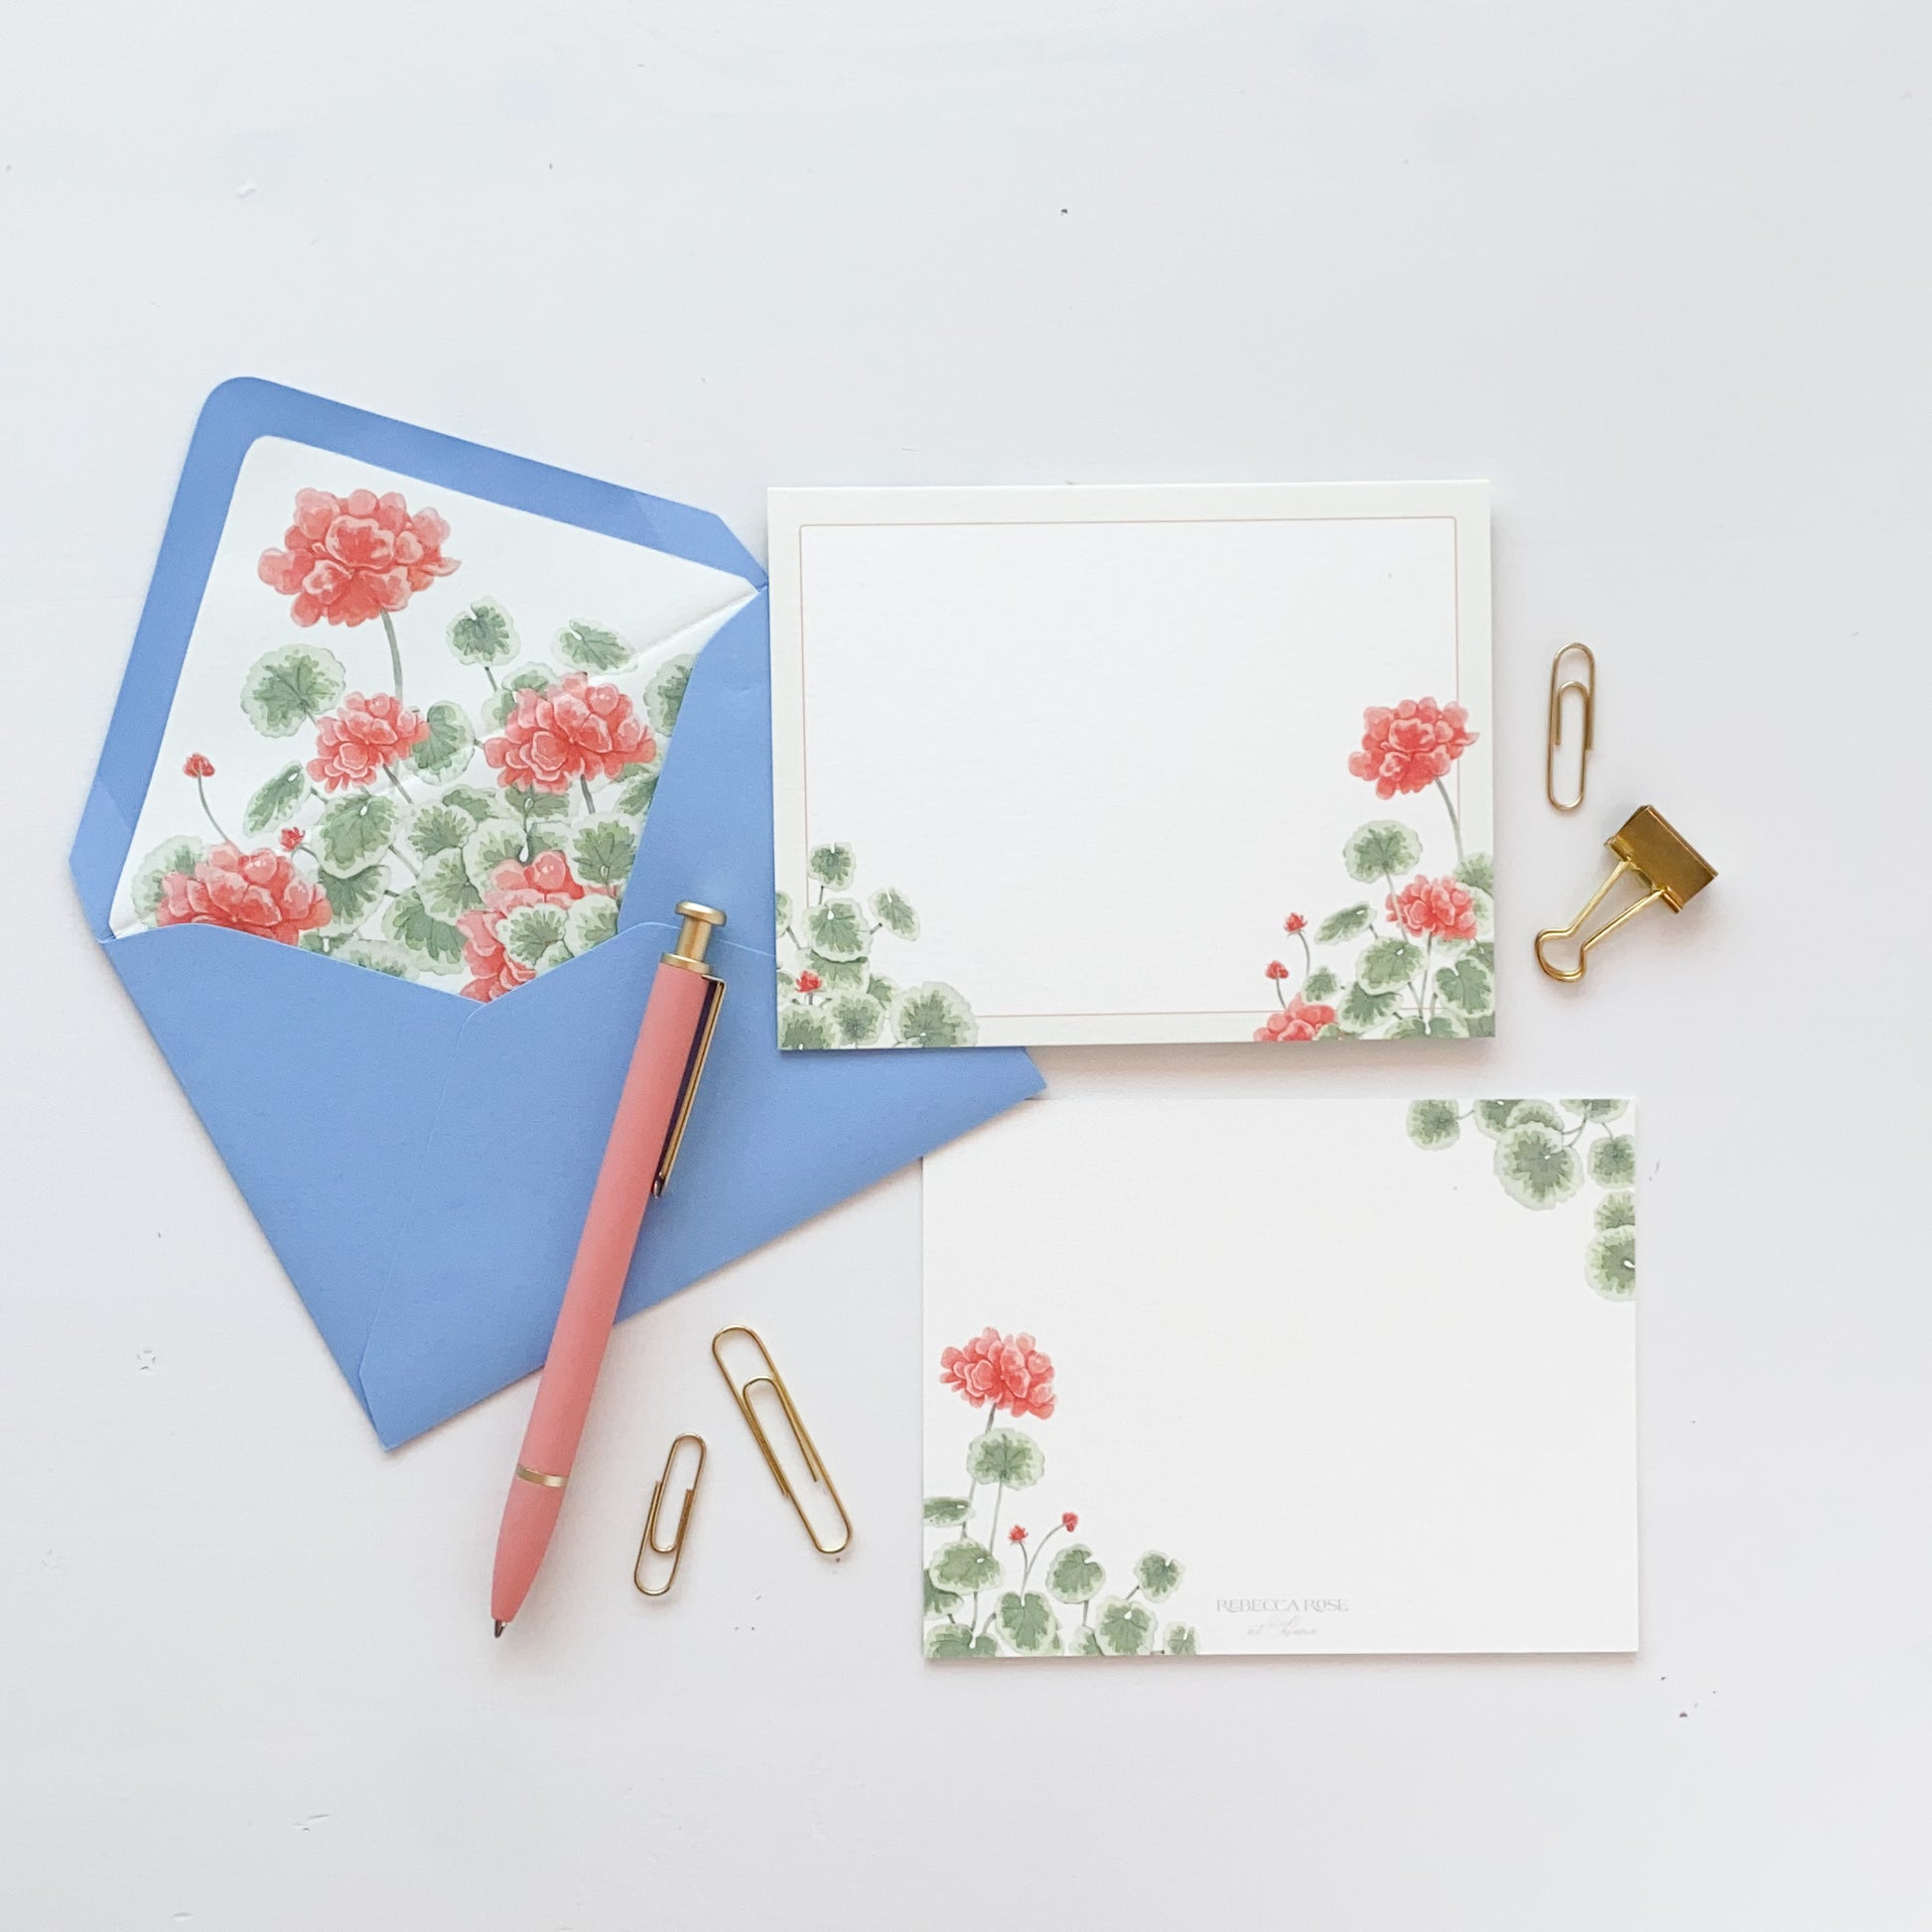 White stationery card featuring red geranium and greenery watercolor artwork. Light blue envelope lined with matching red geranium watercolor artwork.